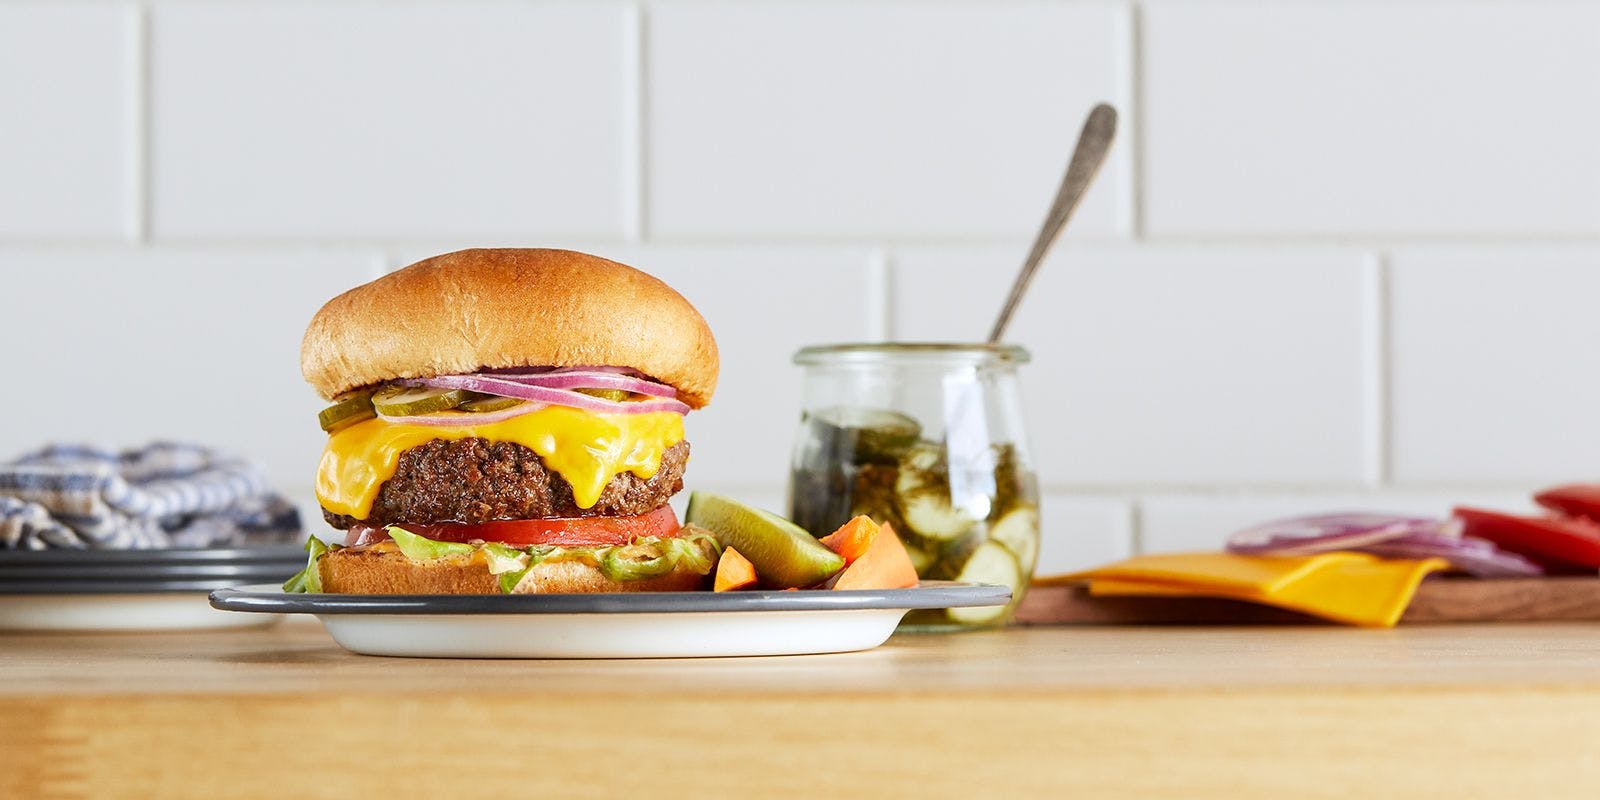 A burger with organic cheese, fresh veggies and the grass-fed beef sits on a counter.